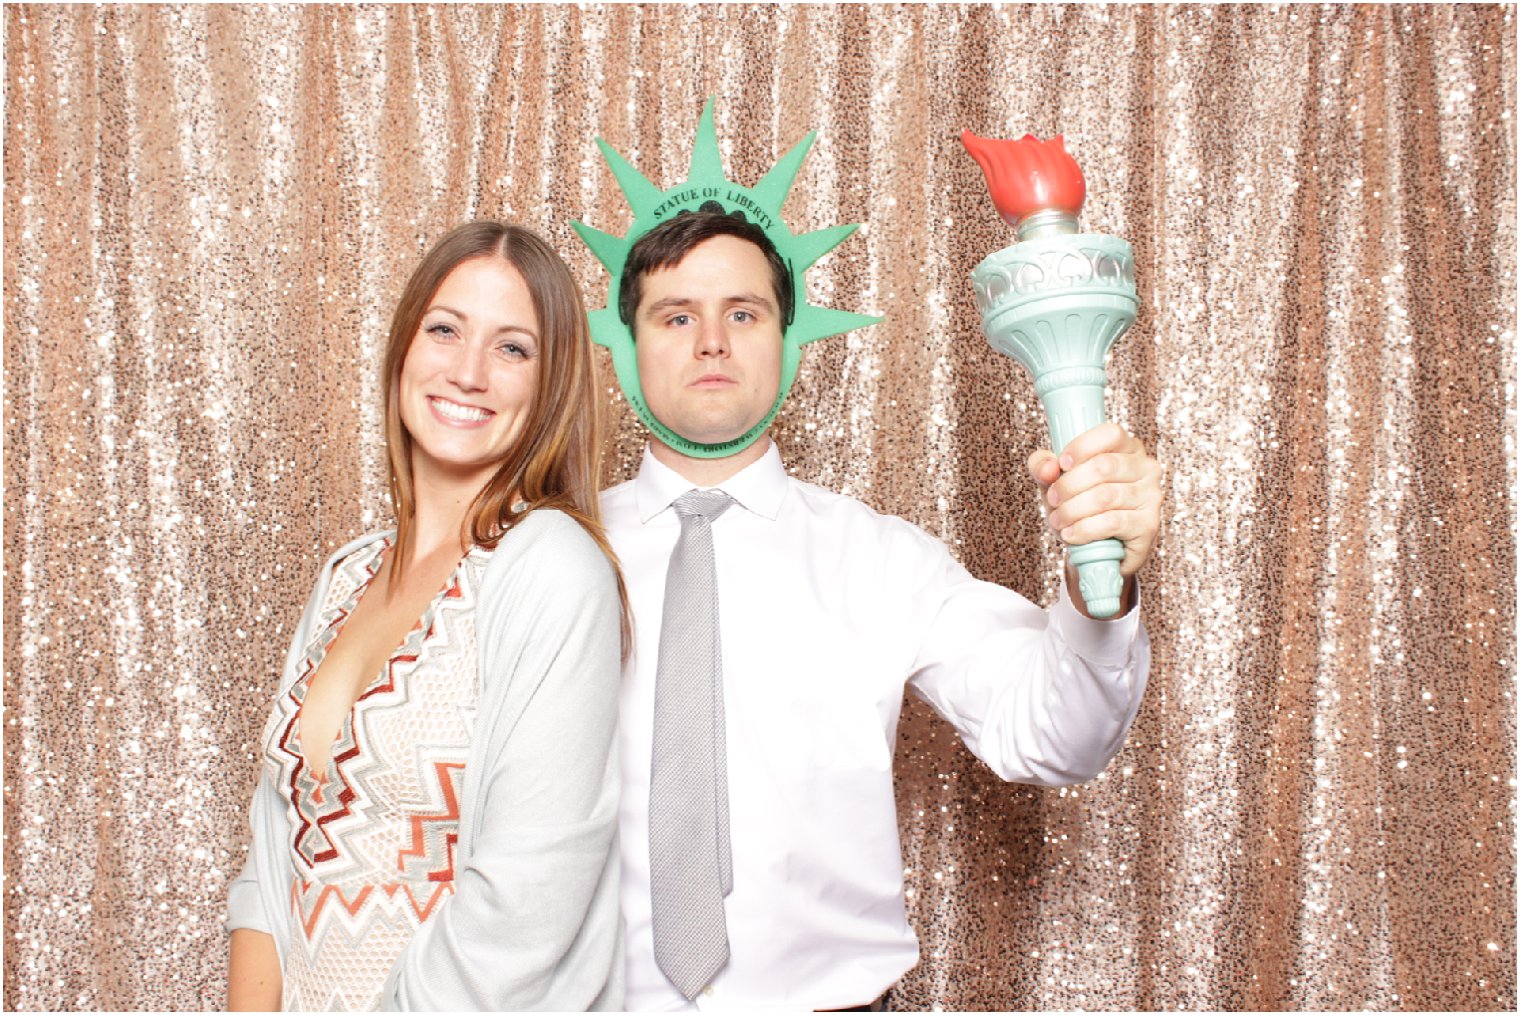 statue of liberty photo booth props